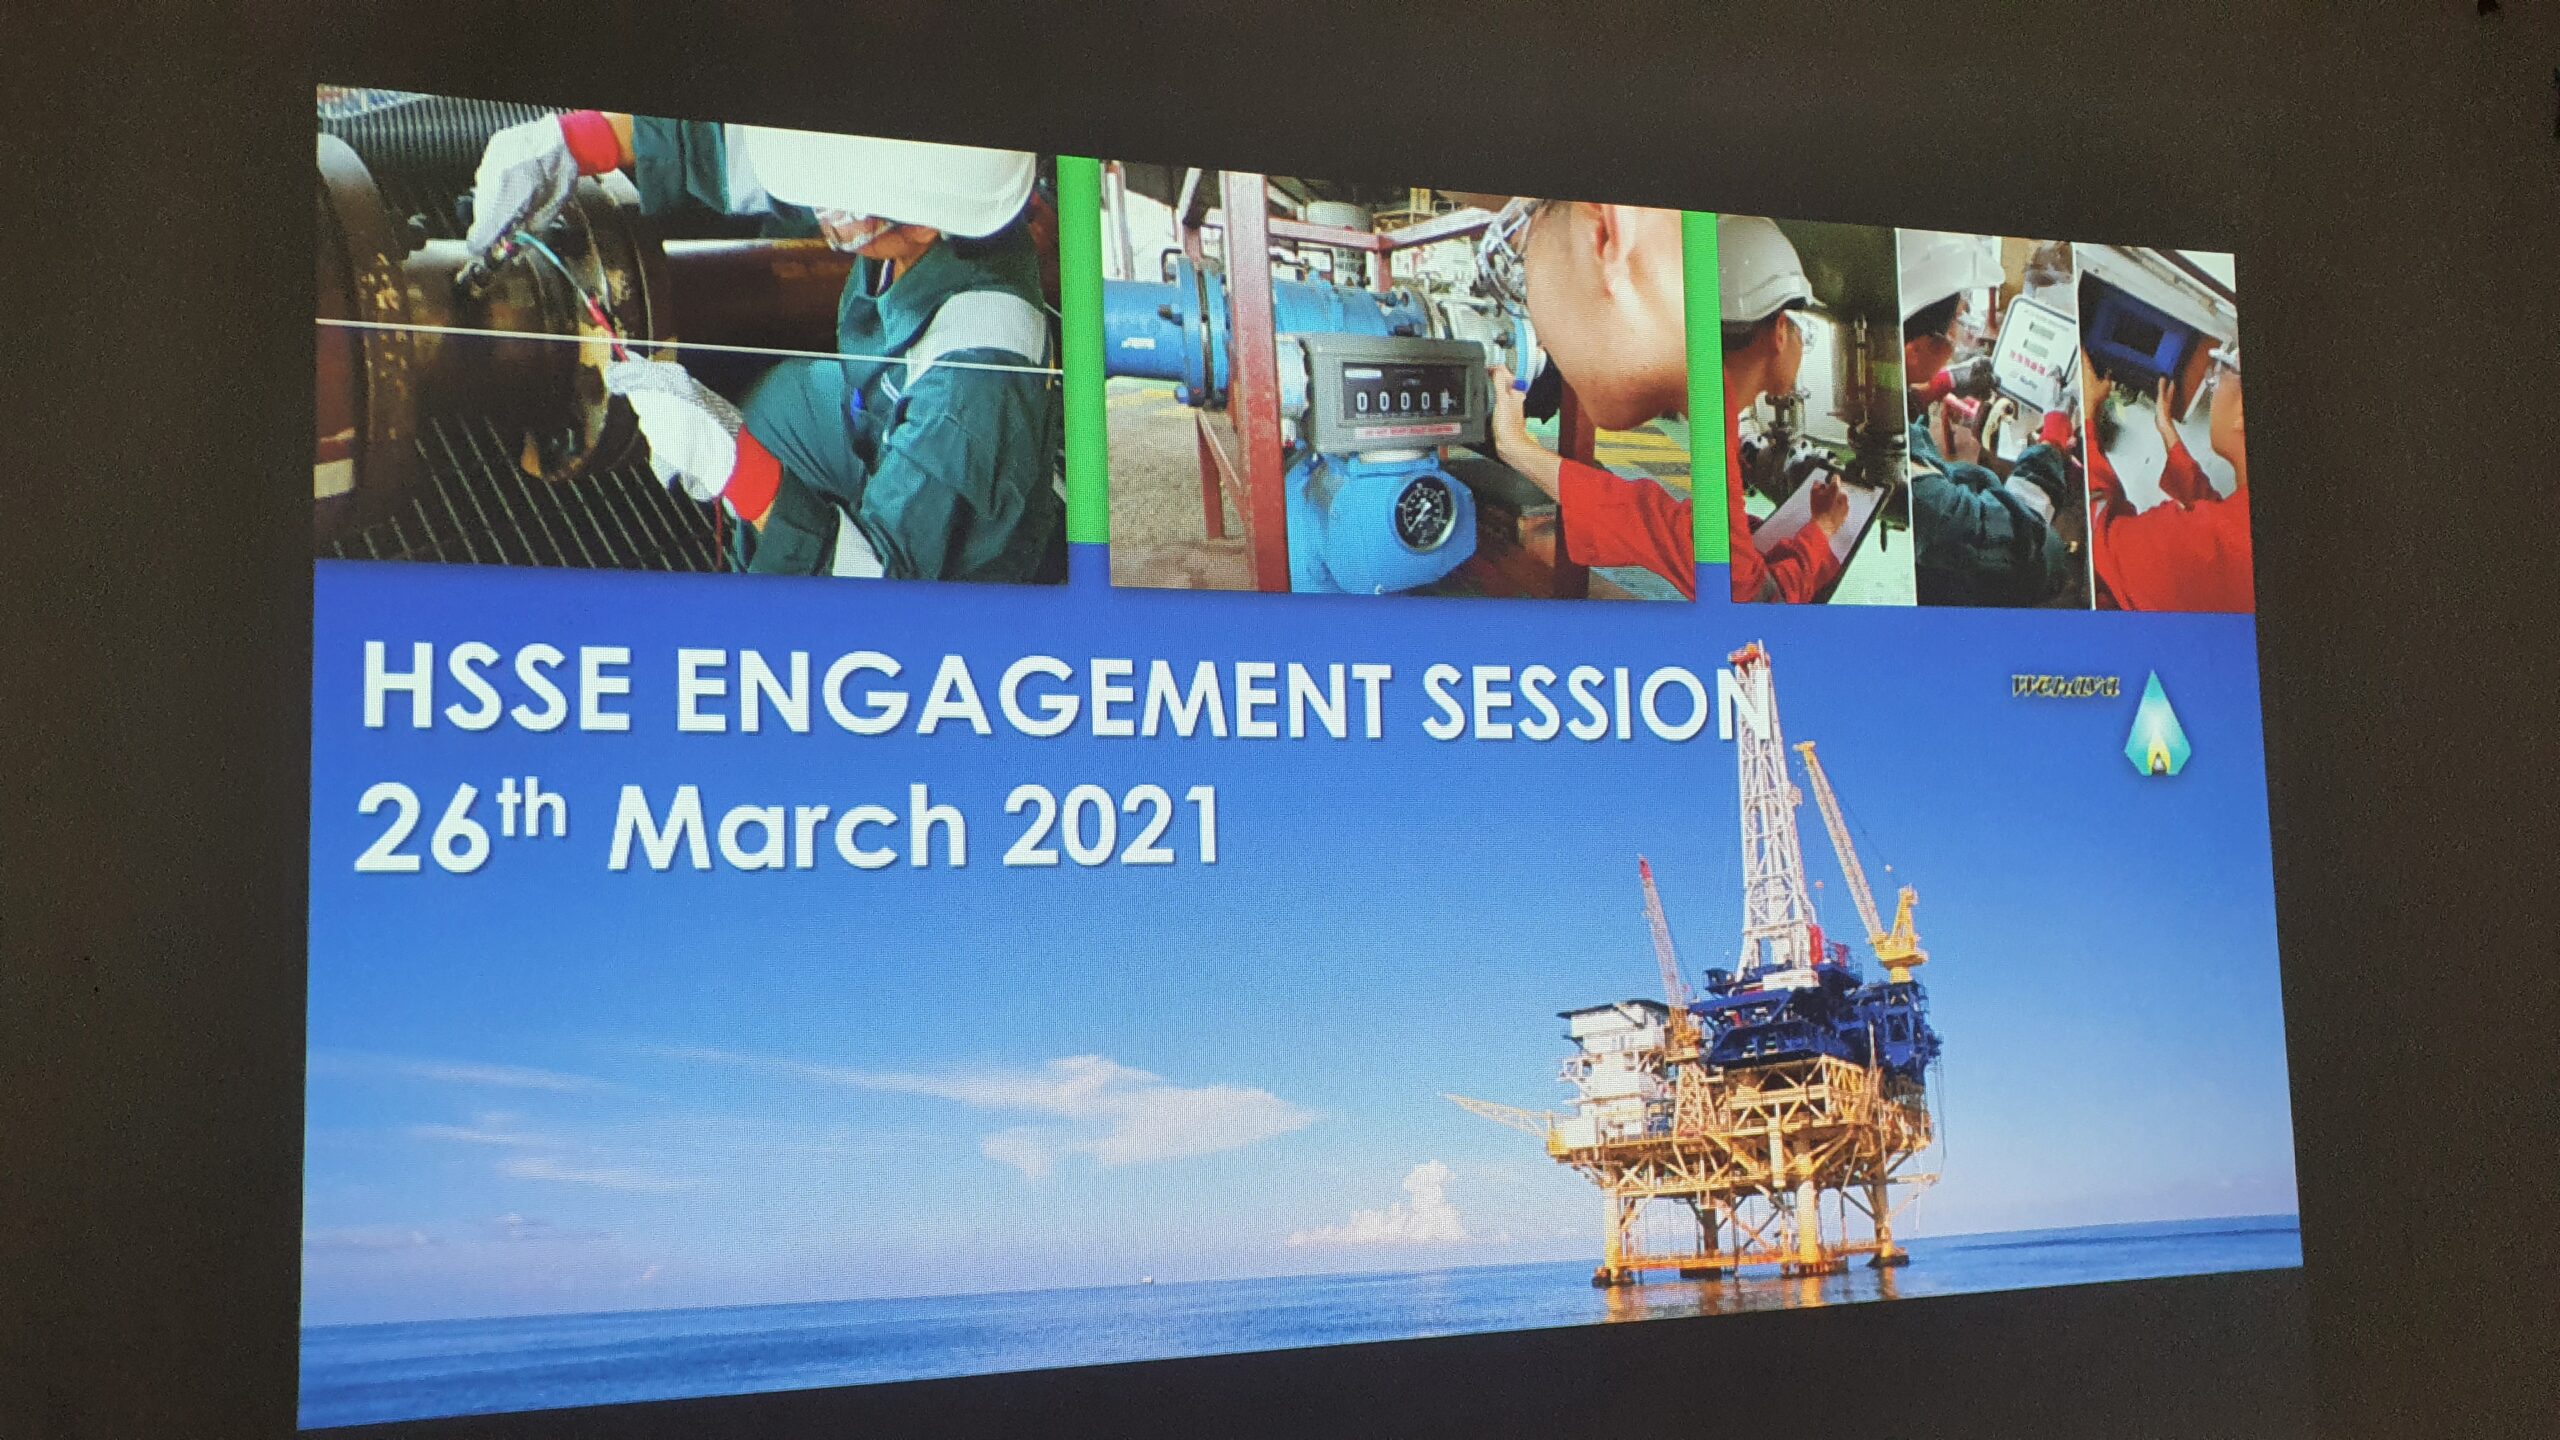 HSSE Engagement Session & ACT Recognition Award Event 2021